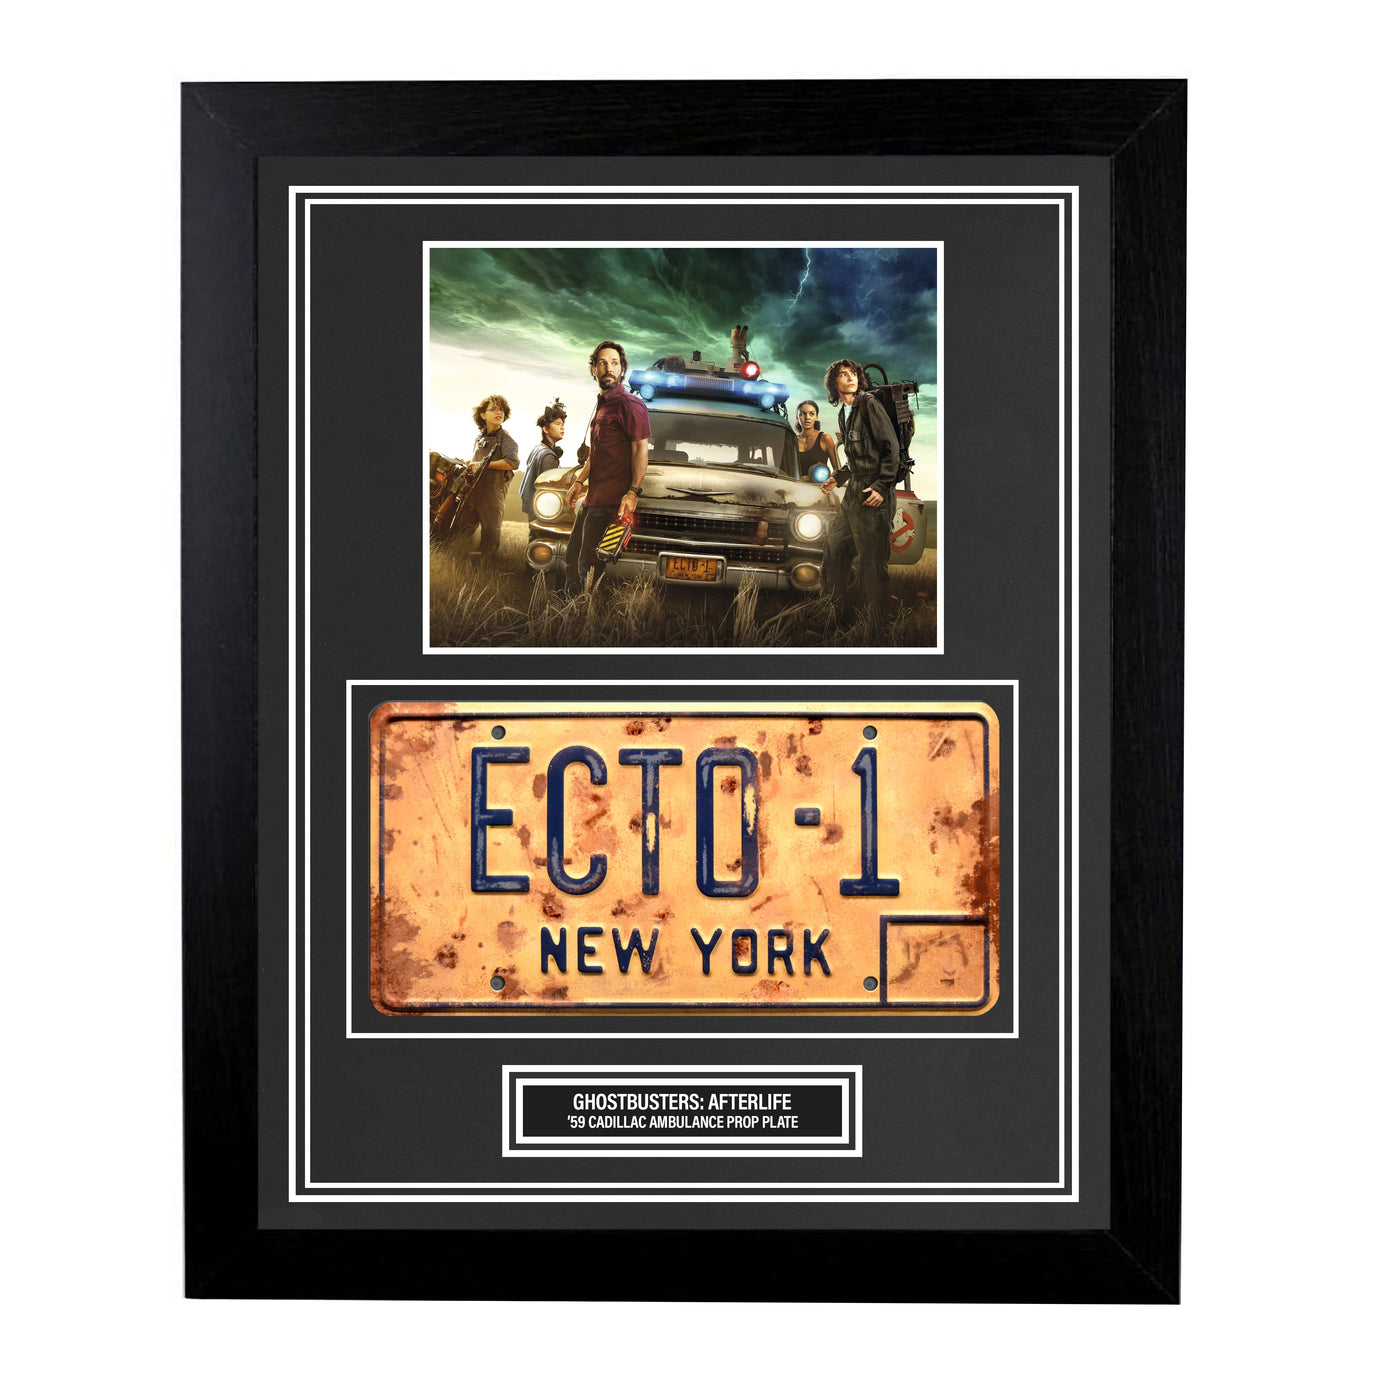 Ghostbusters Custom Framed 1959 Cadillac Ambulance License Plate Prop Wall Display